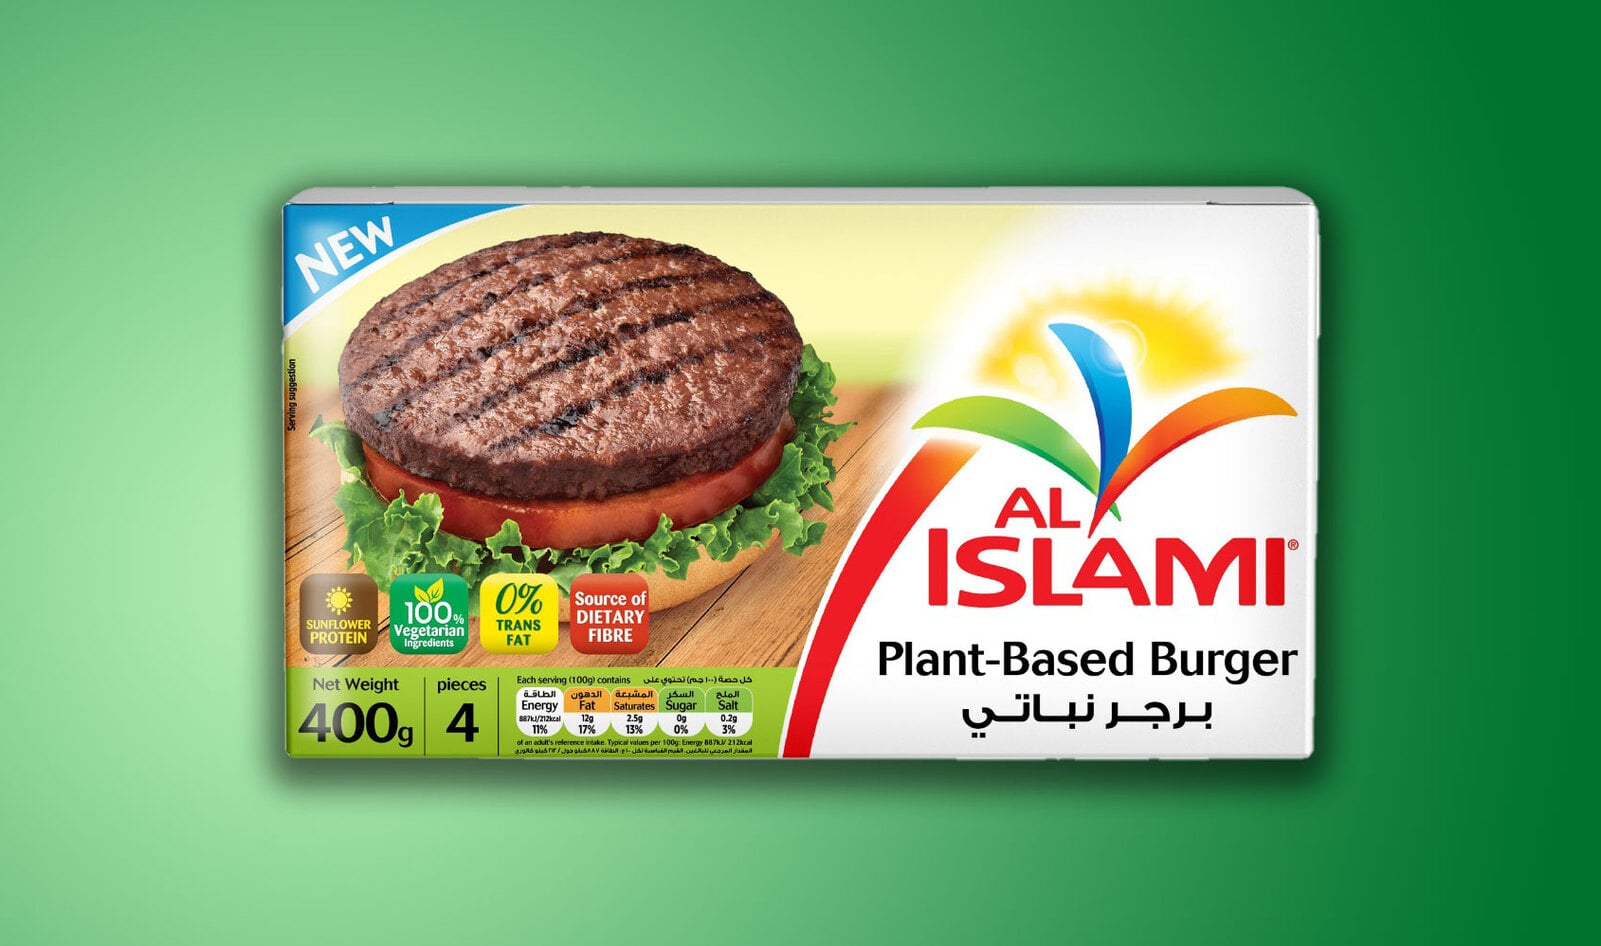 Major Halal Food Company Launches its First Vegan Burger in UAE